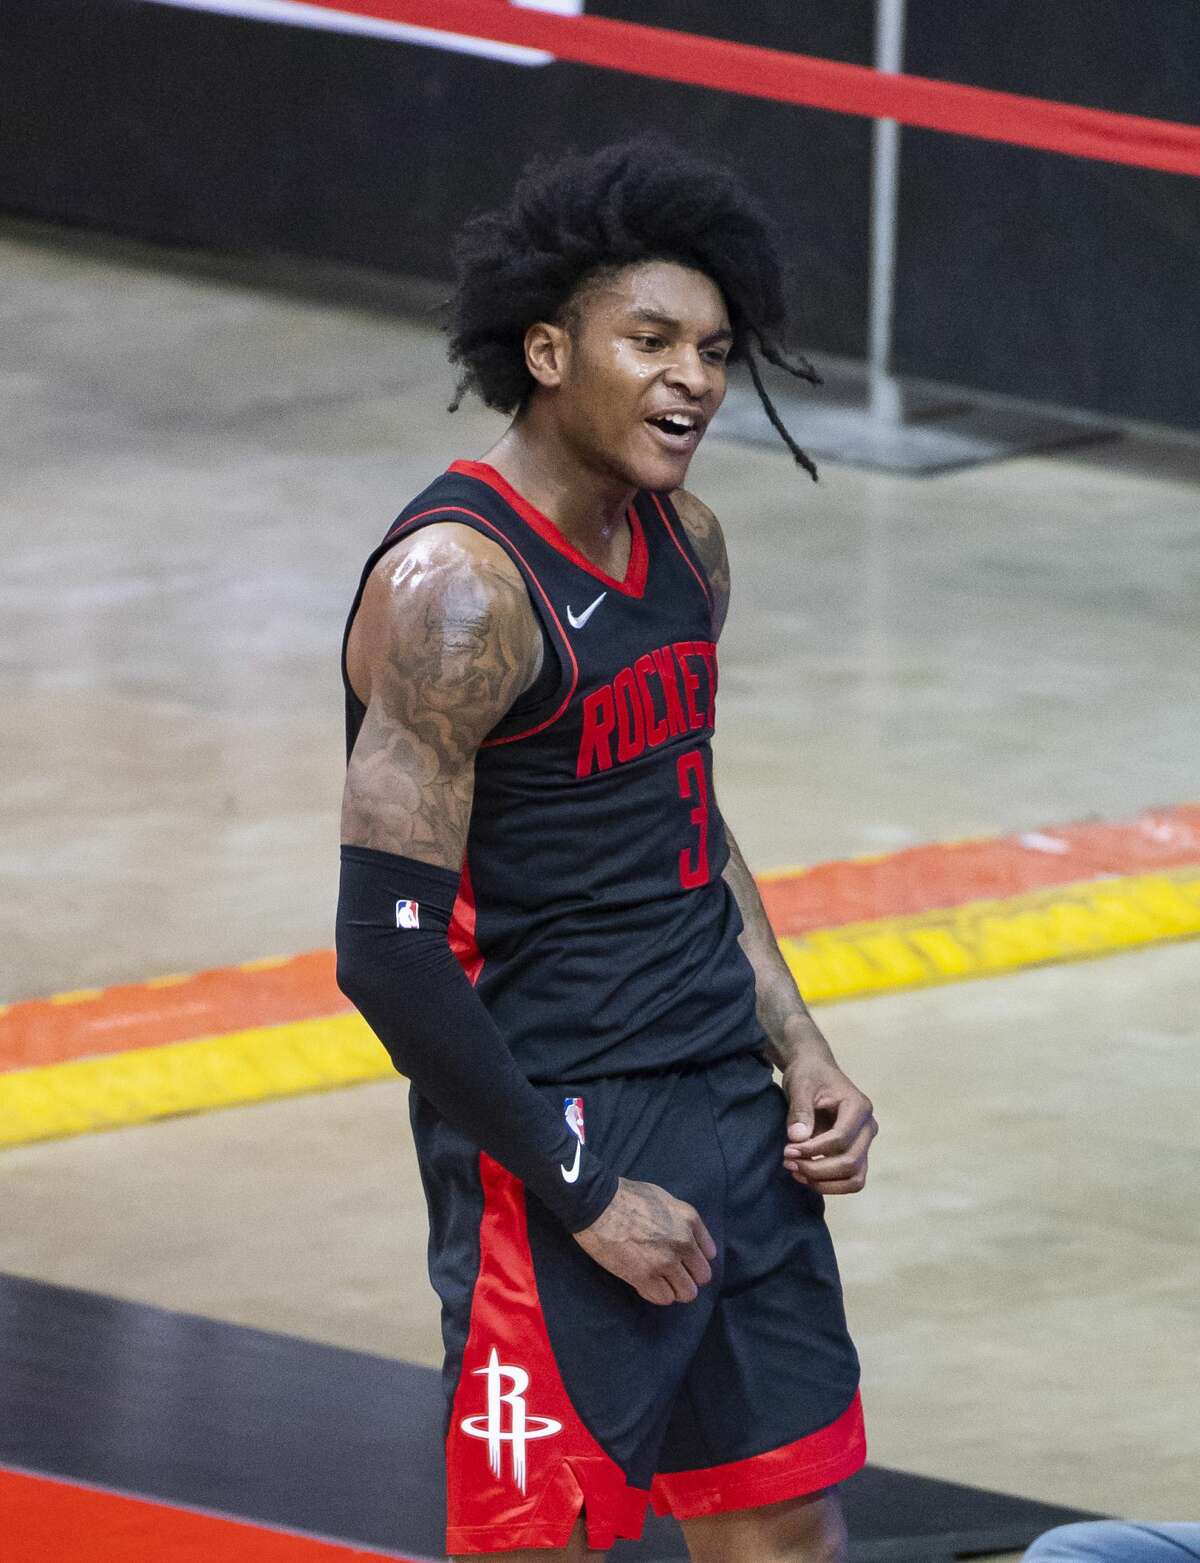 Houston Rockets guard Kevin Porter Jr. (3) reacts after making a shot and drawing a foul during the third quarter of an NBA game between the Houston Rockets and Milwaukee Bucks on Thursday, April 29, 2021, at Toyota Center in Houston.